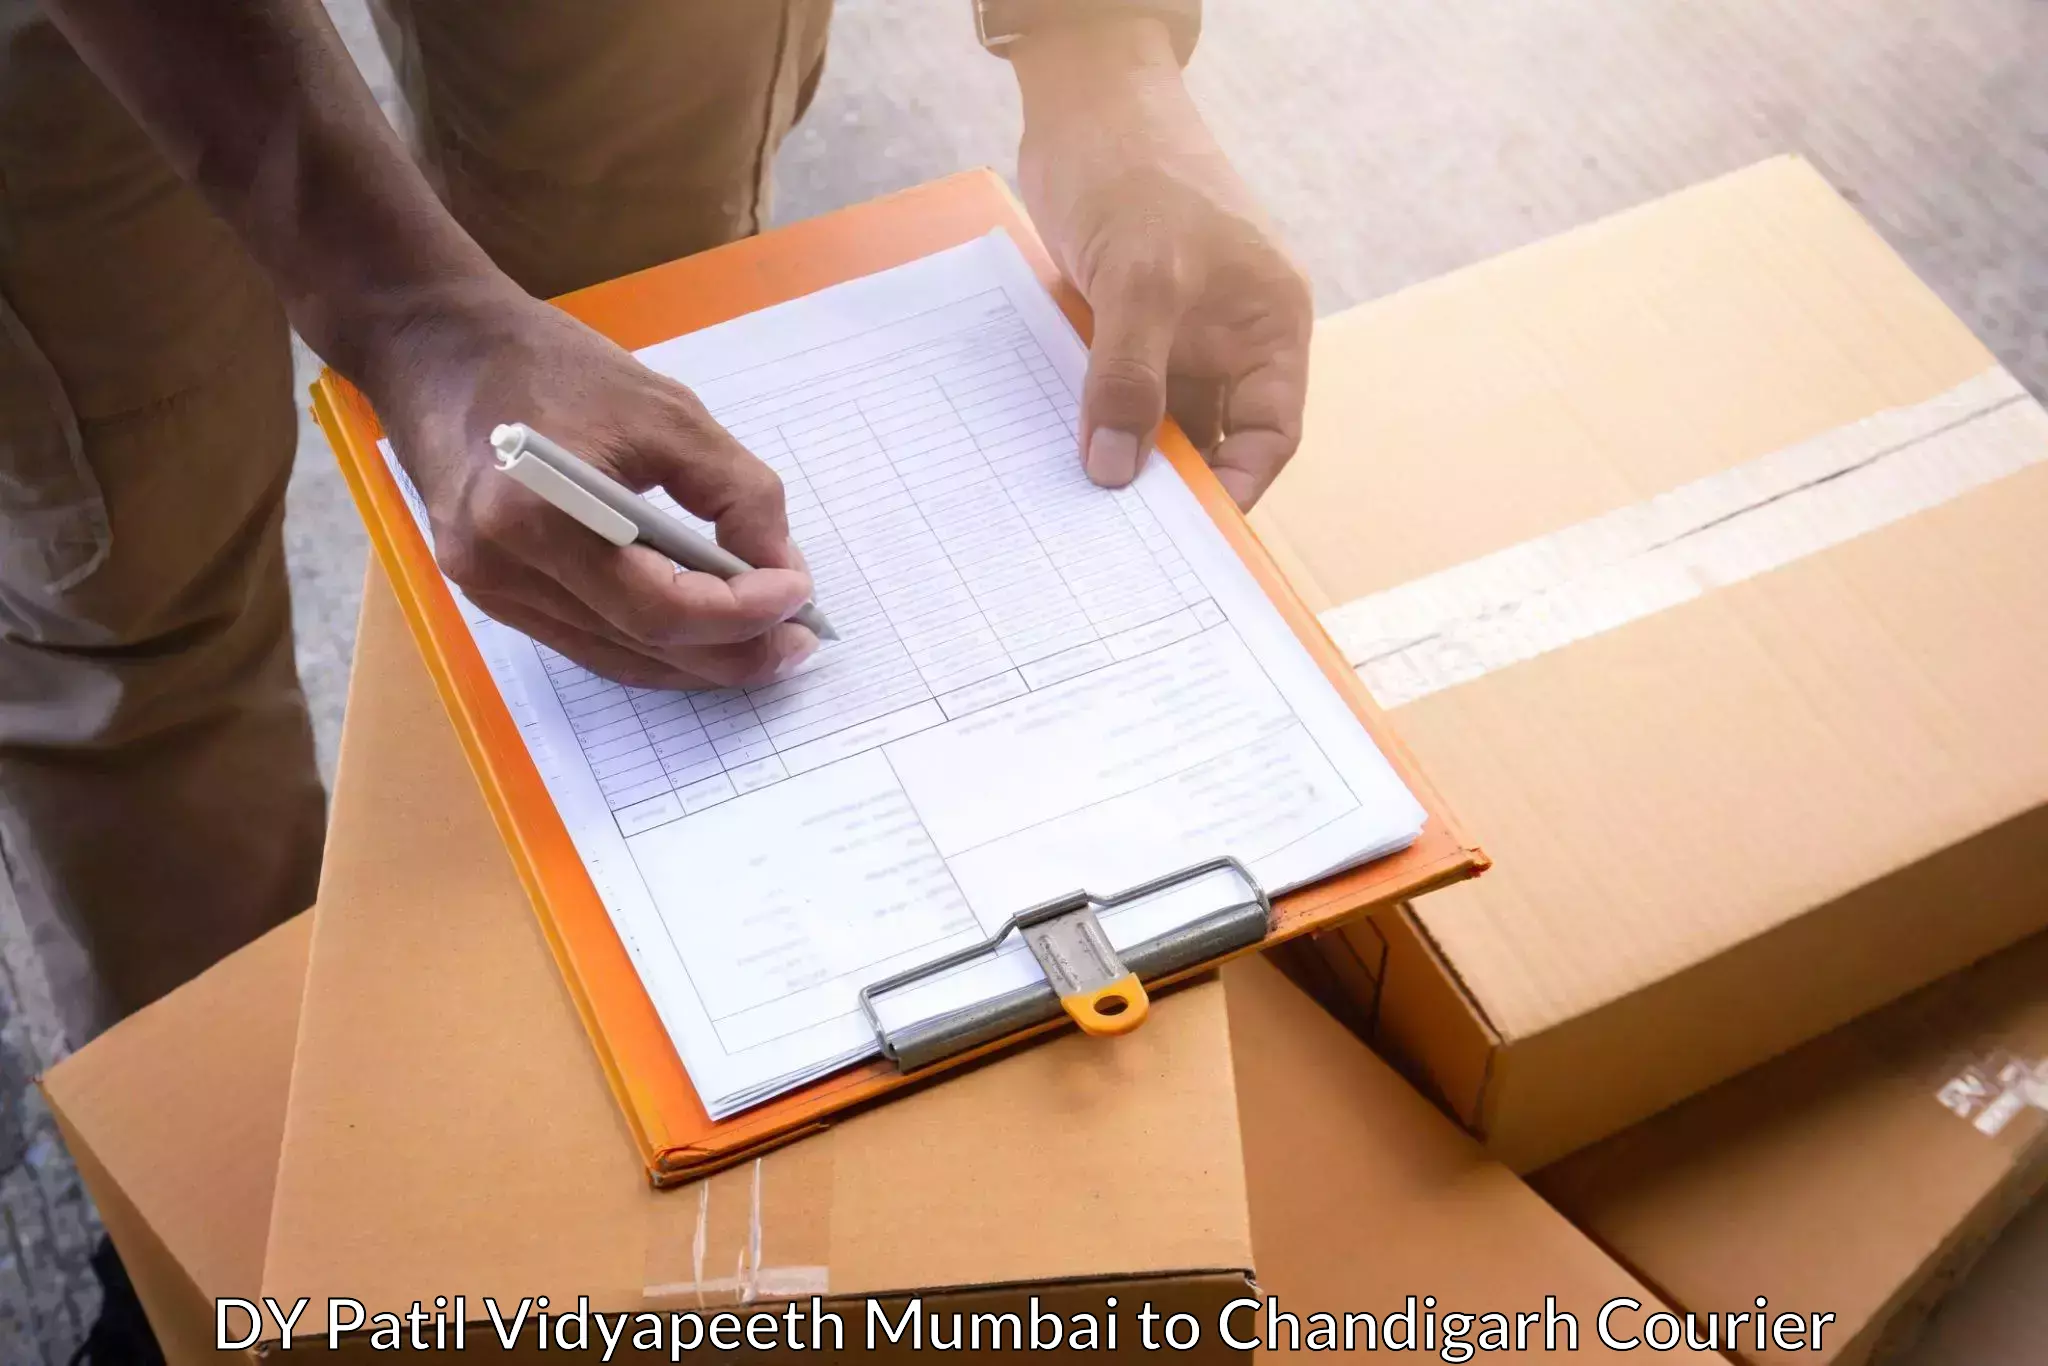 Dynamic courier services DY Patil Vidyapeeth Mumbai to Chandigarh